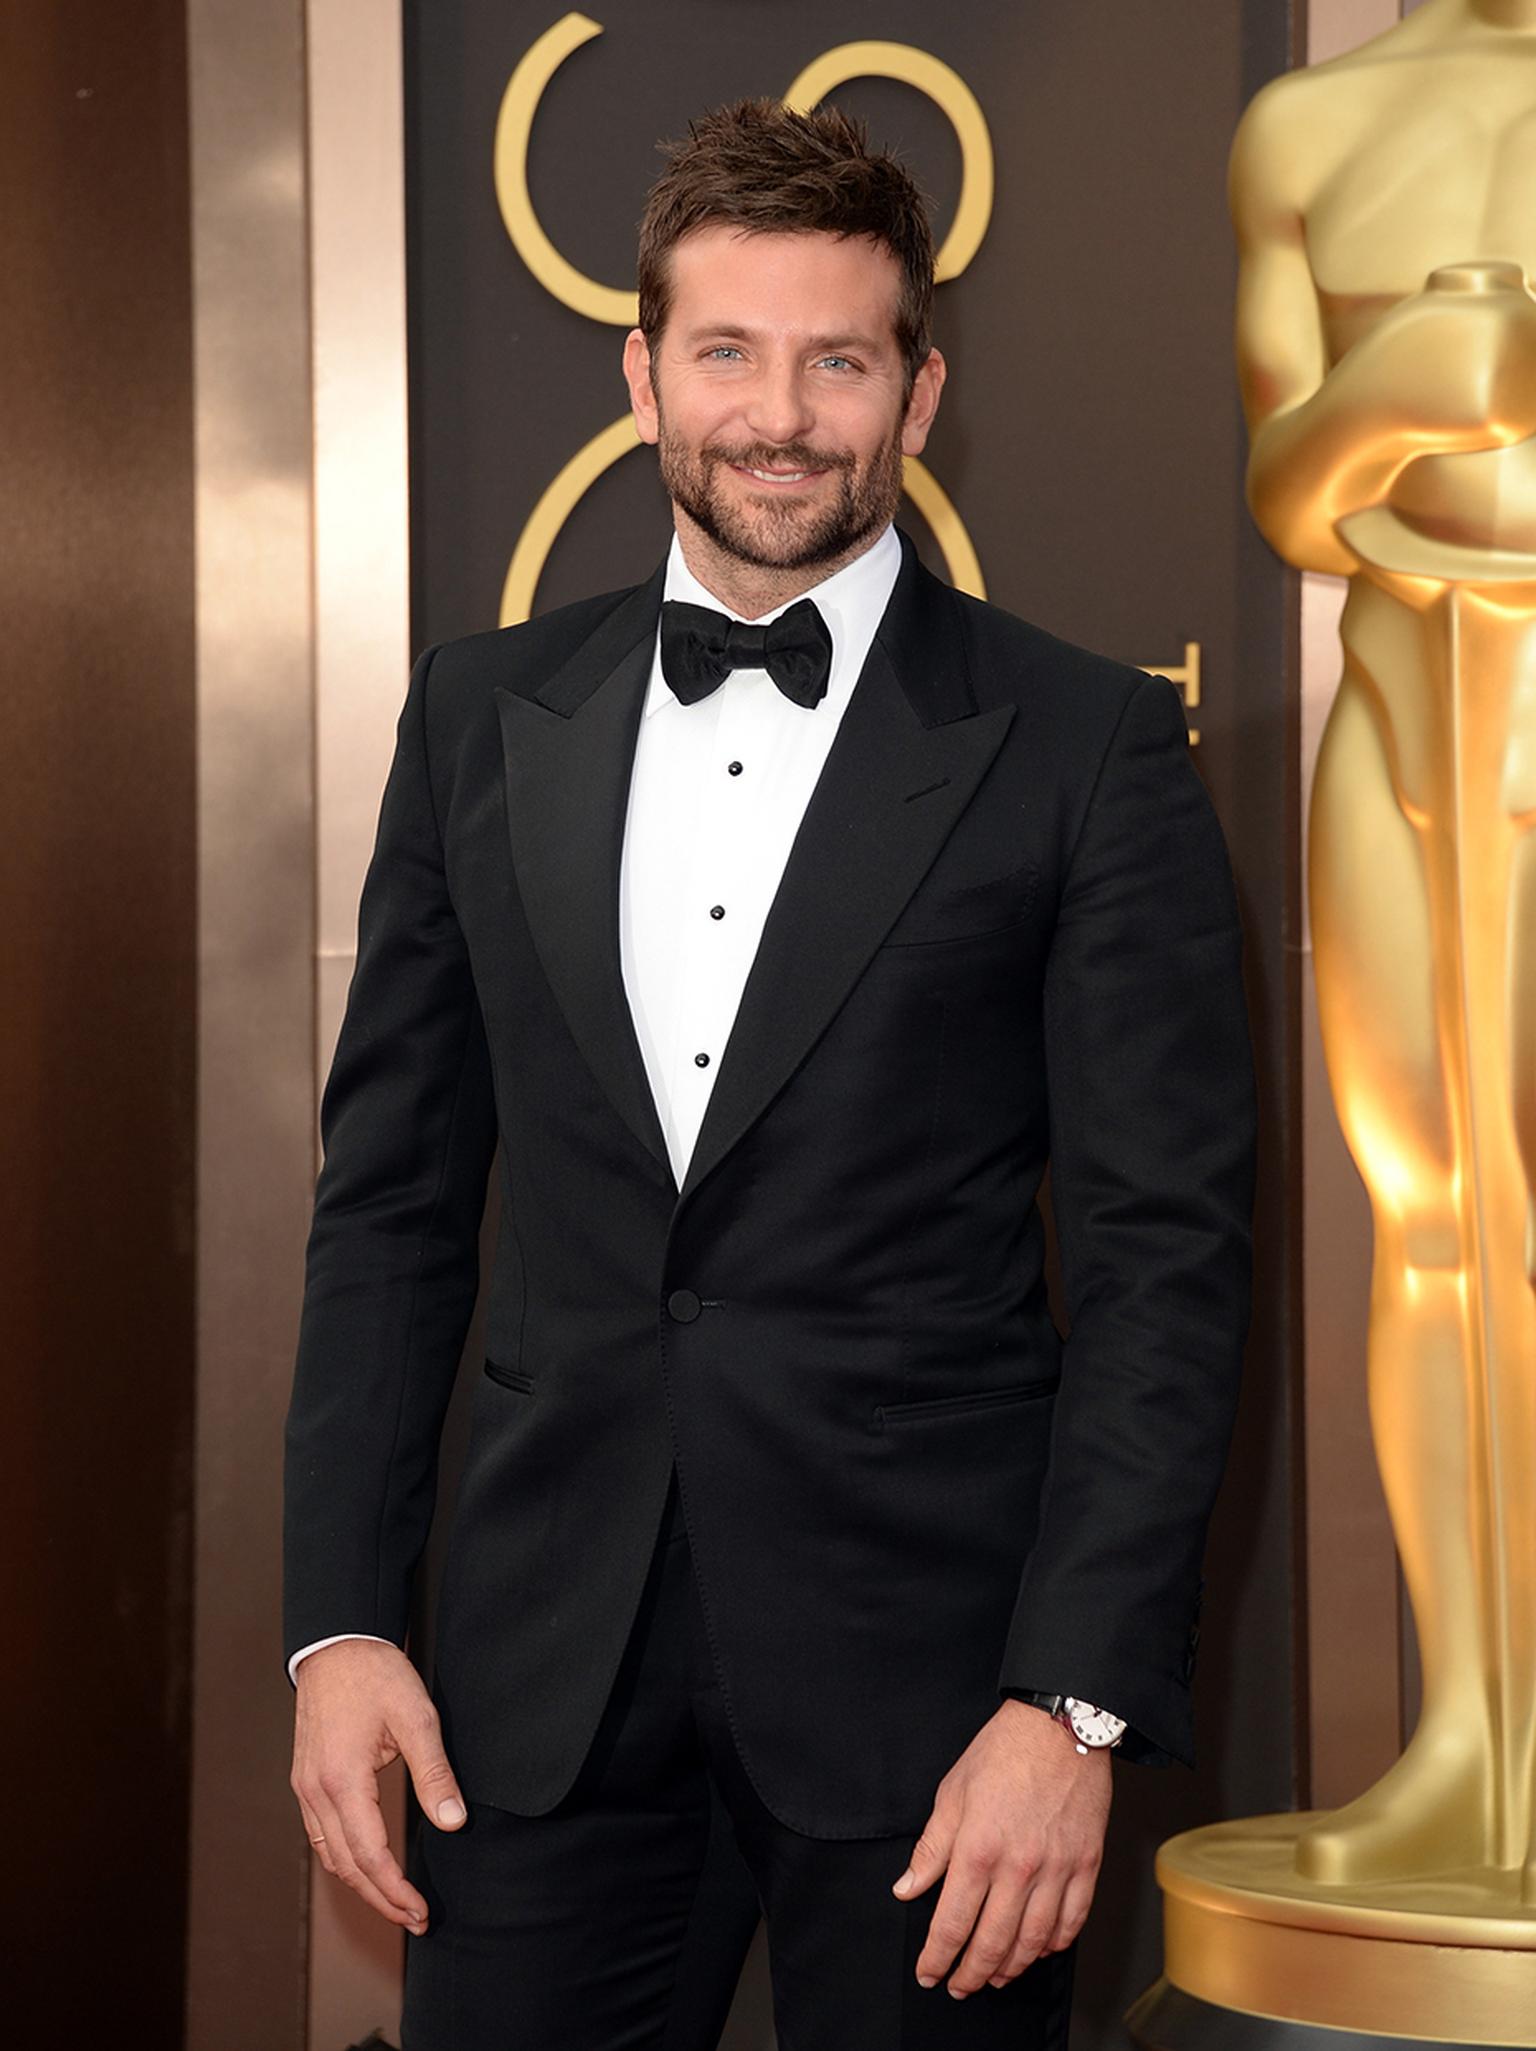 Nominated for Best Actor in a Supporting Role, Bradley Cooper wore Chopard’s L.U.C 1937 swatch in stainless steel for his red carpet entrance